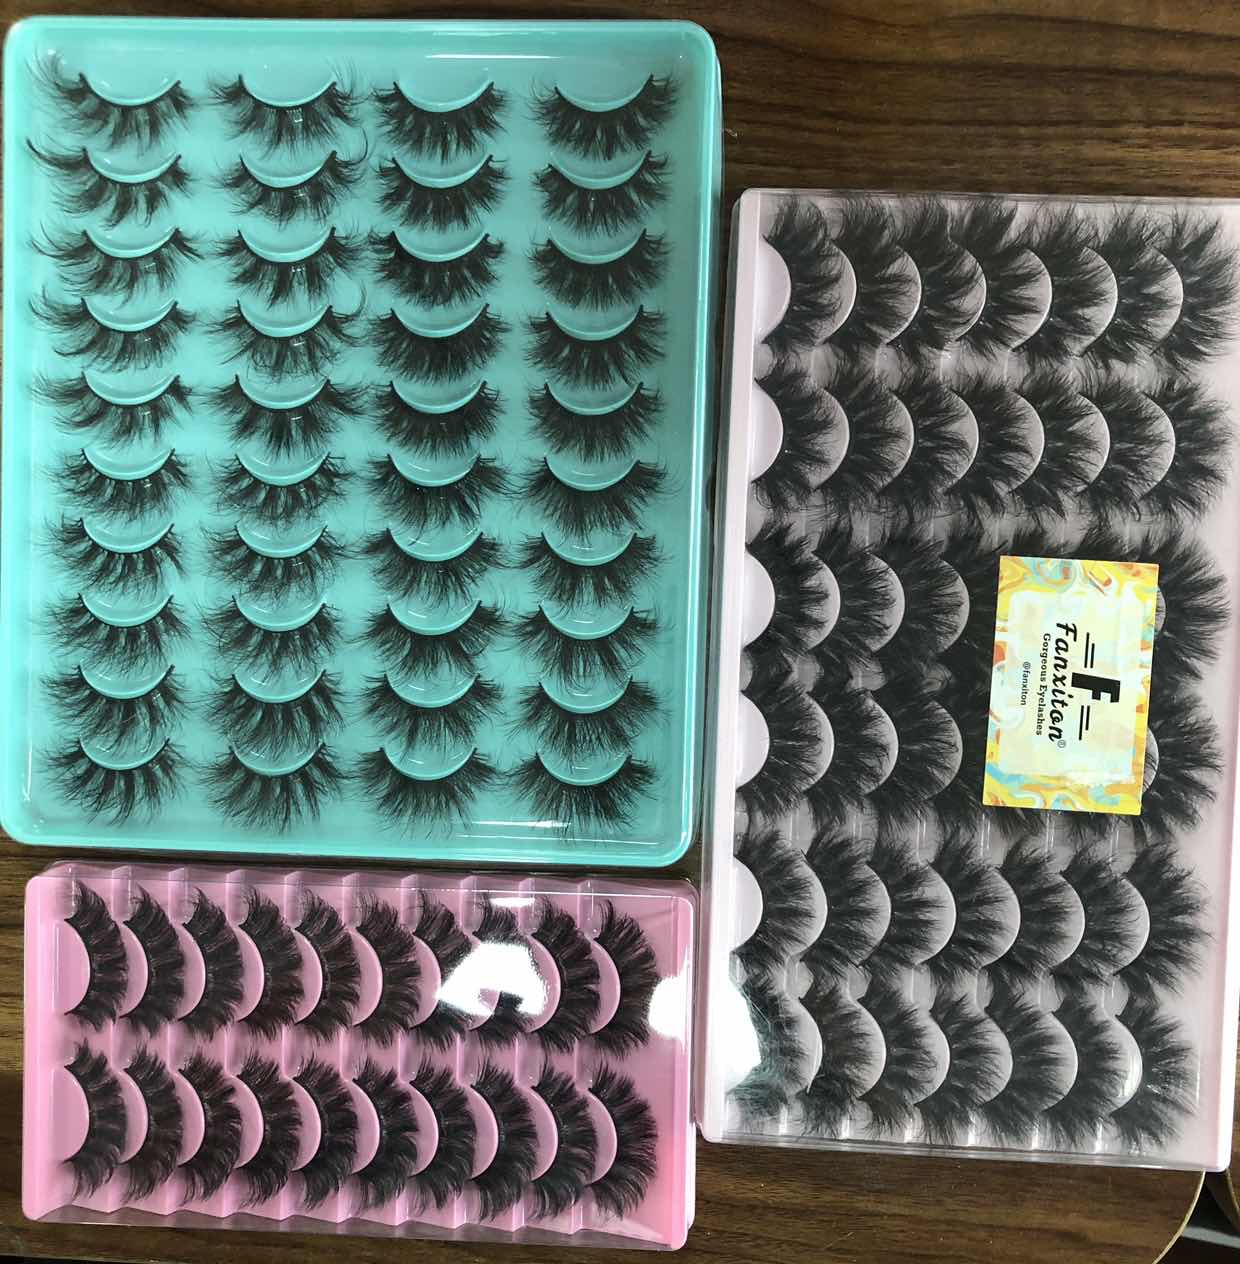 3 packs of lashes